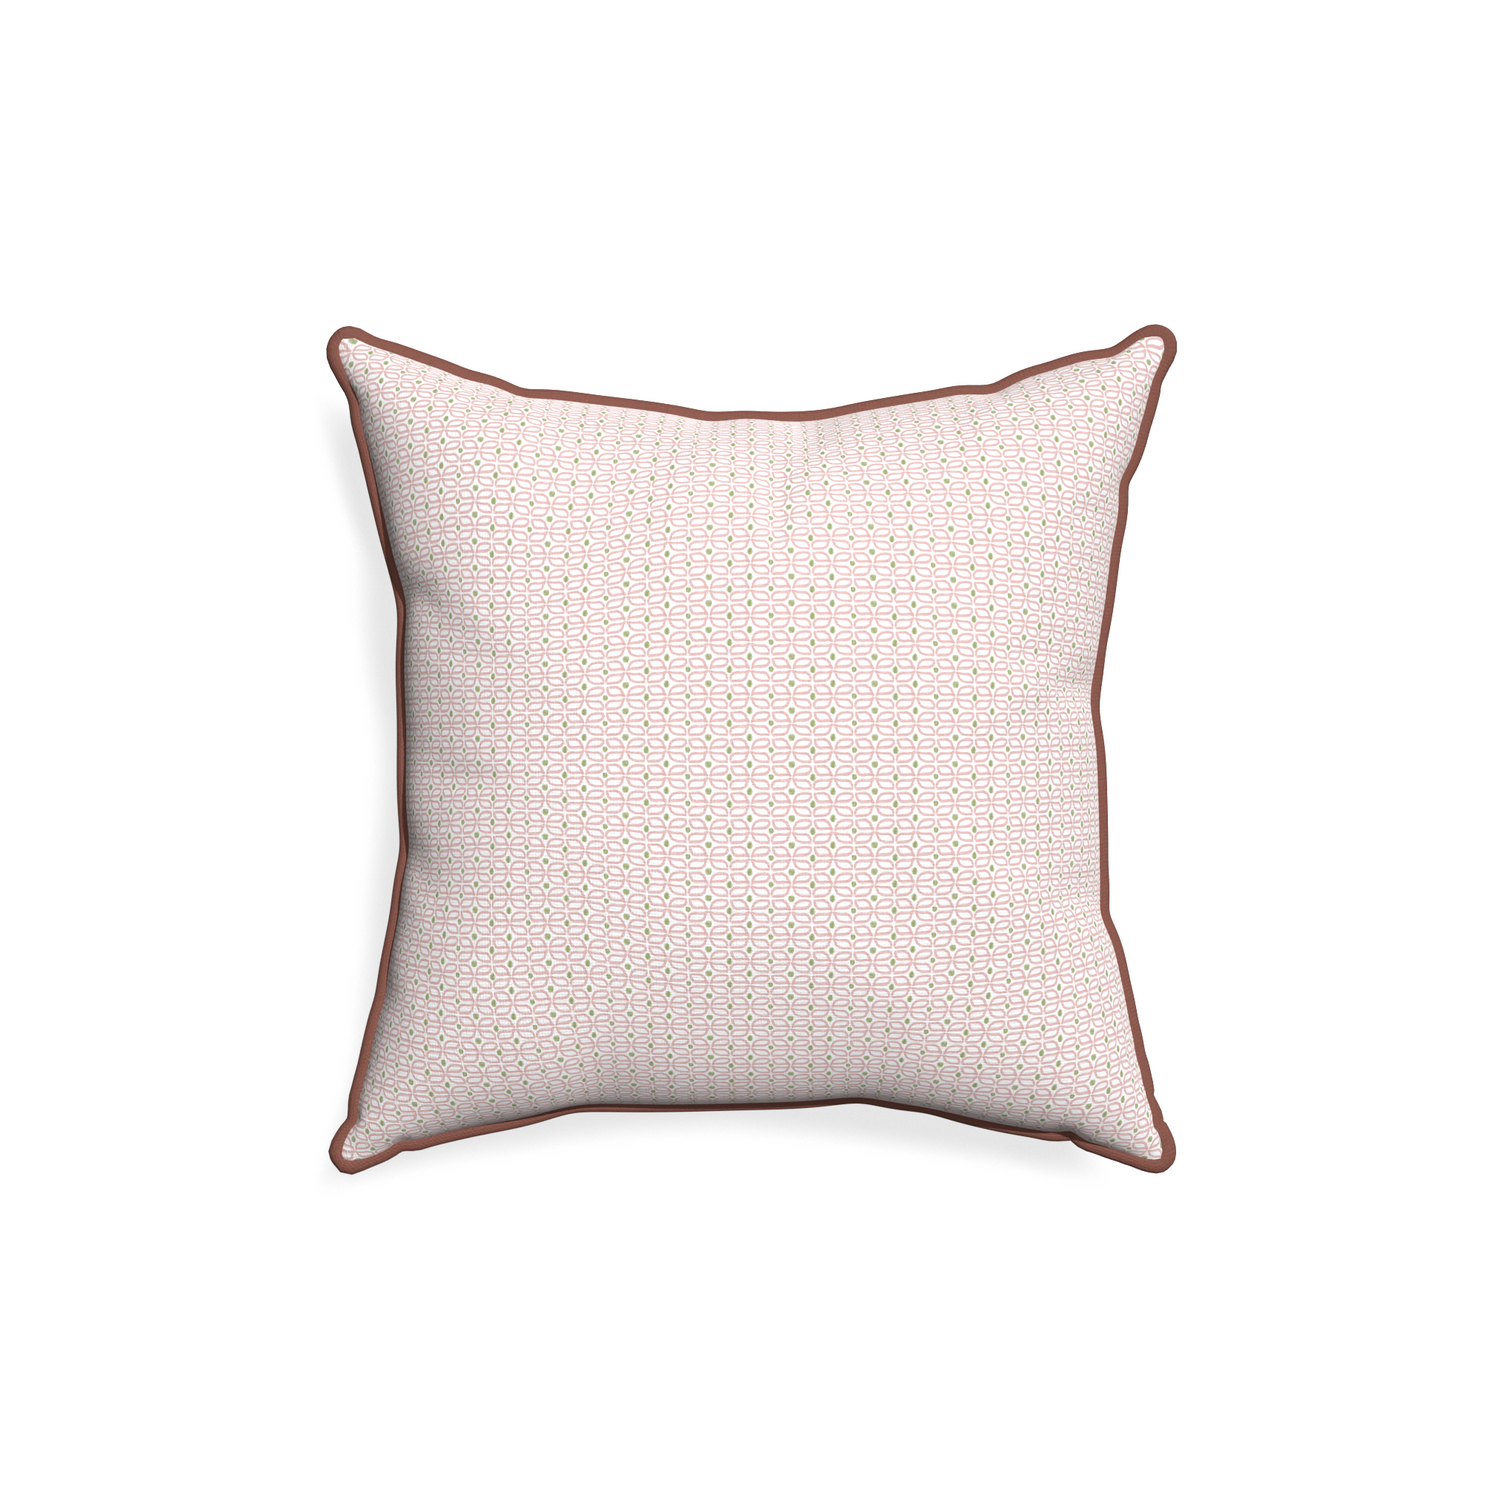 18-square loomi pink custom pillow with w piping on white background